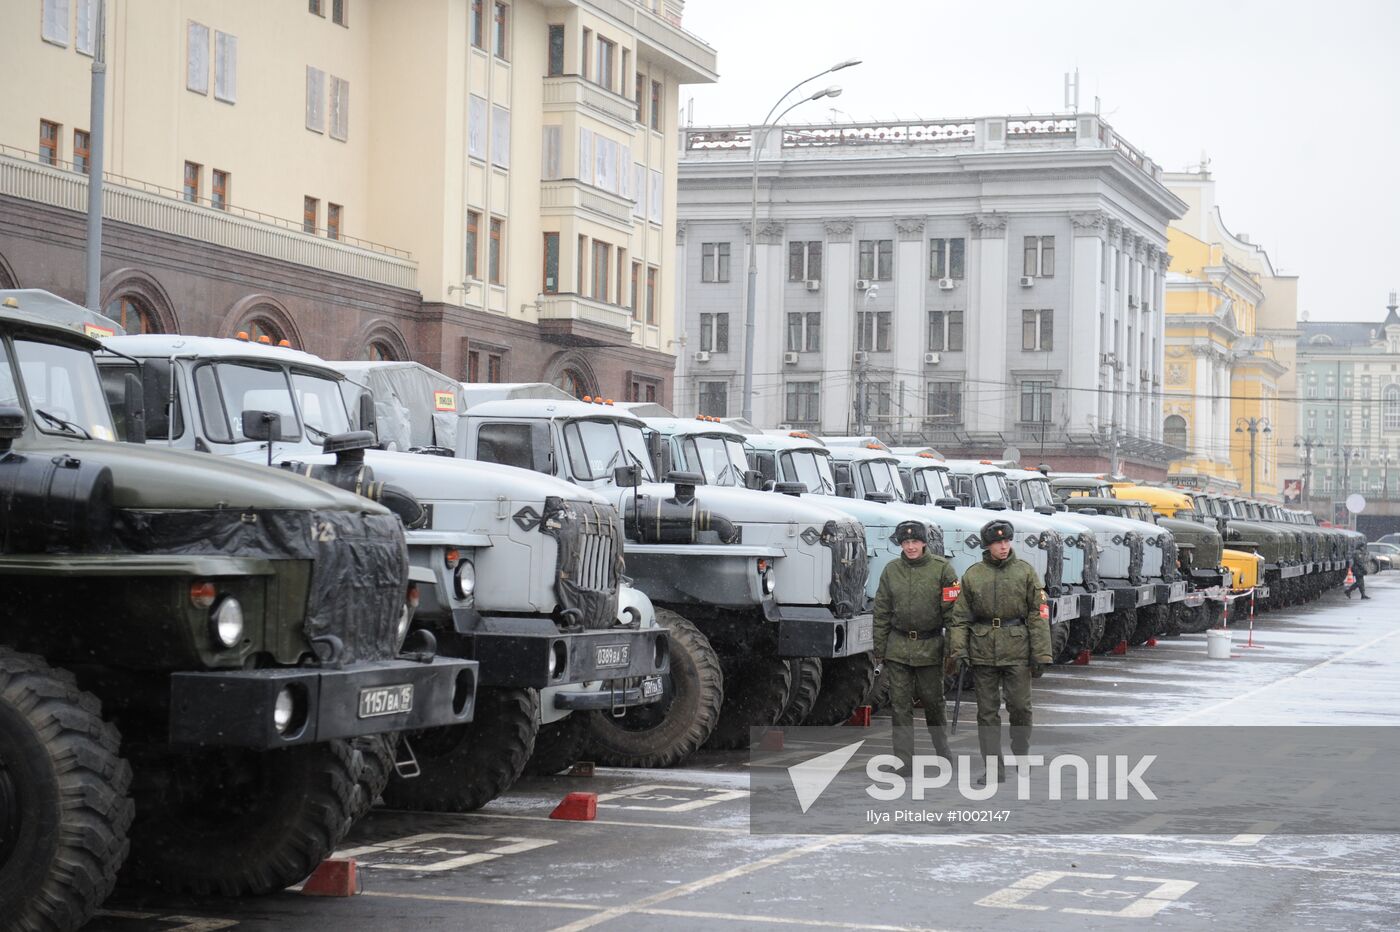 Police strengthen security measures in Moscow